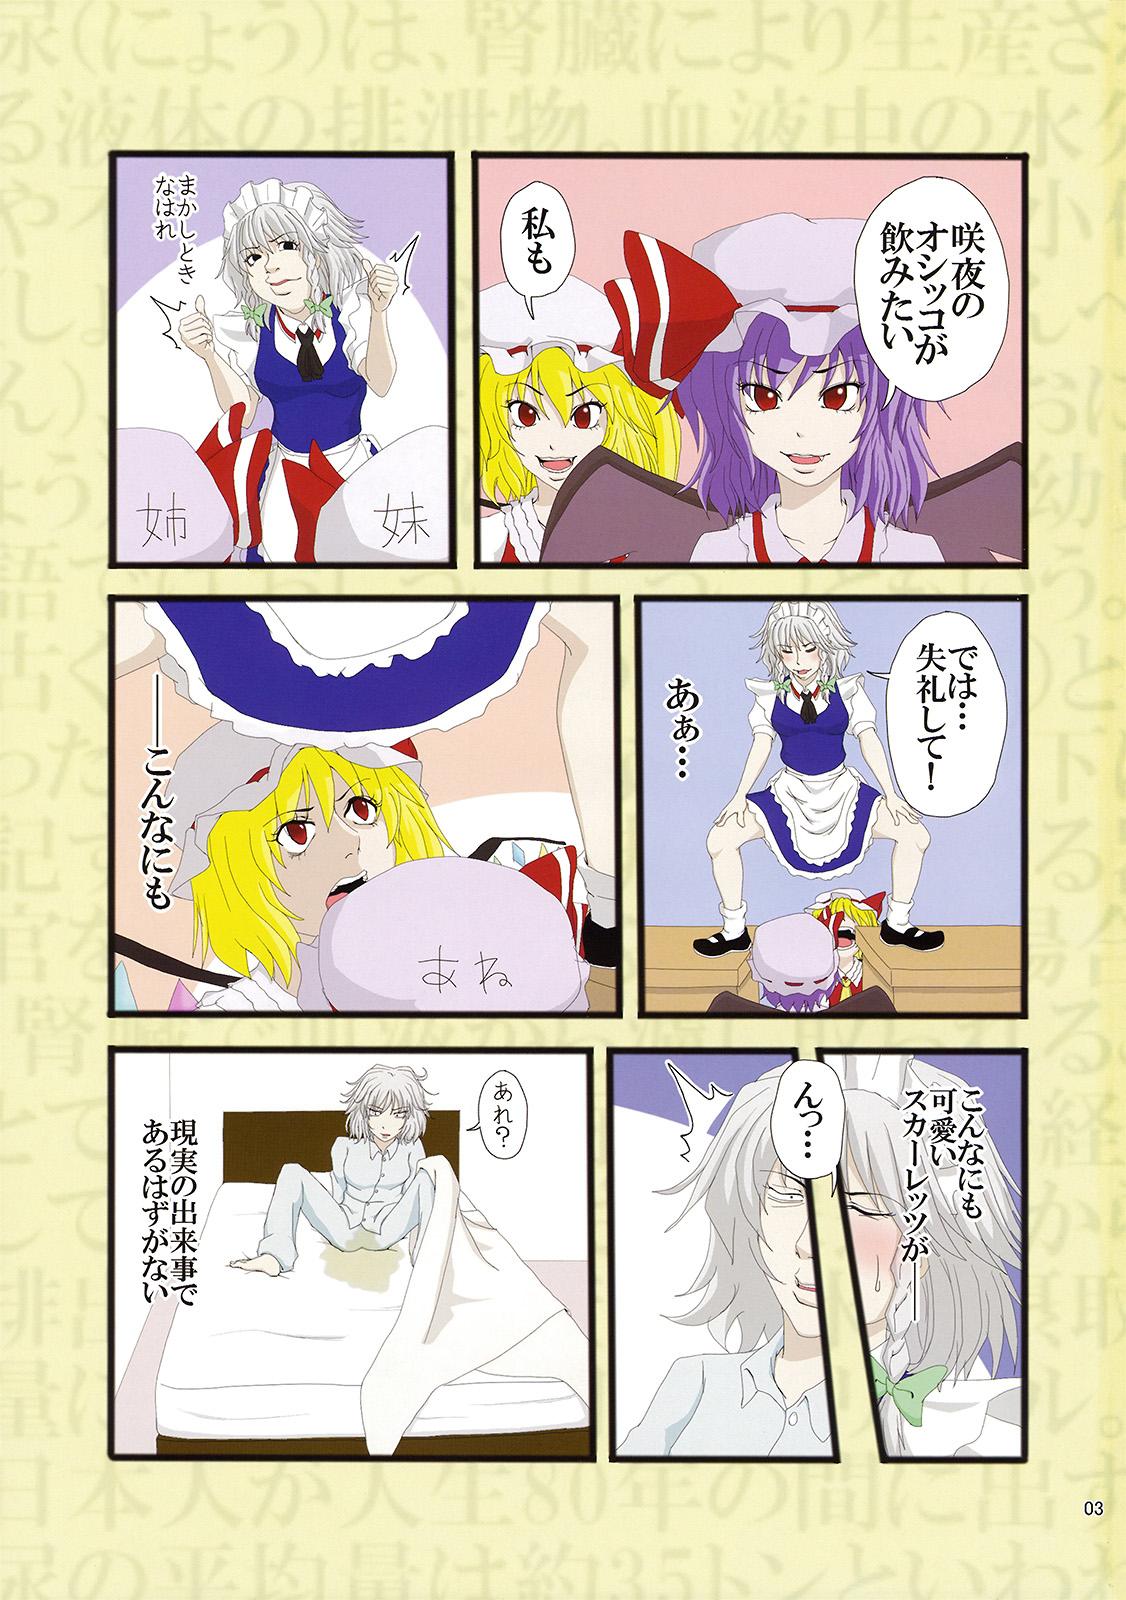 Free 18 Year Old Porn 完全で瀟洒な尿者 - Touhou project Foreplay - Page 3